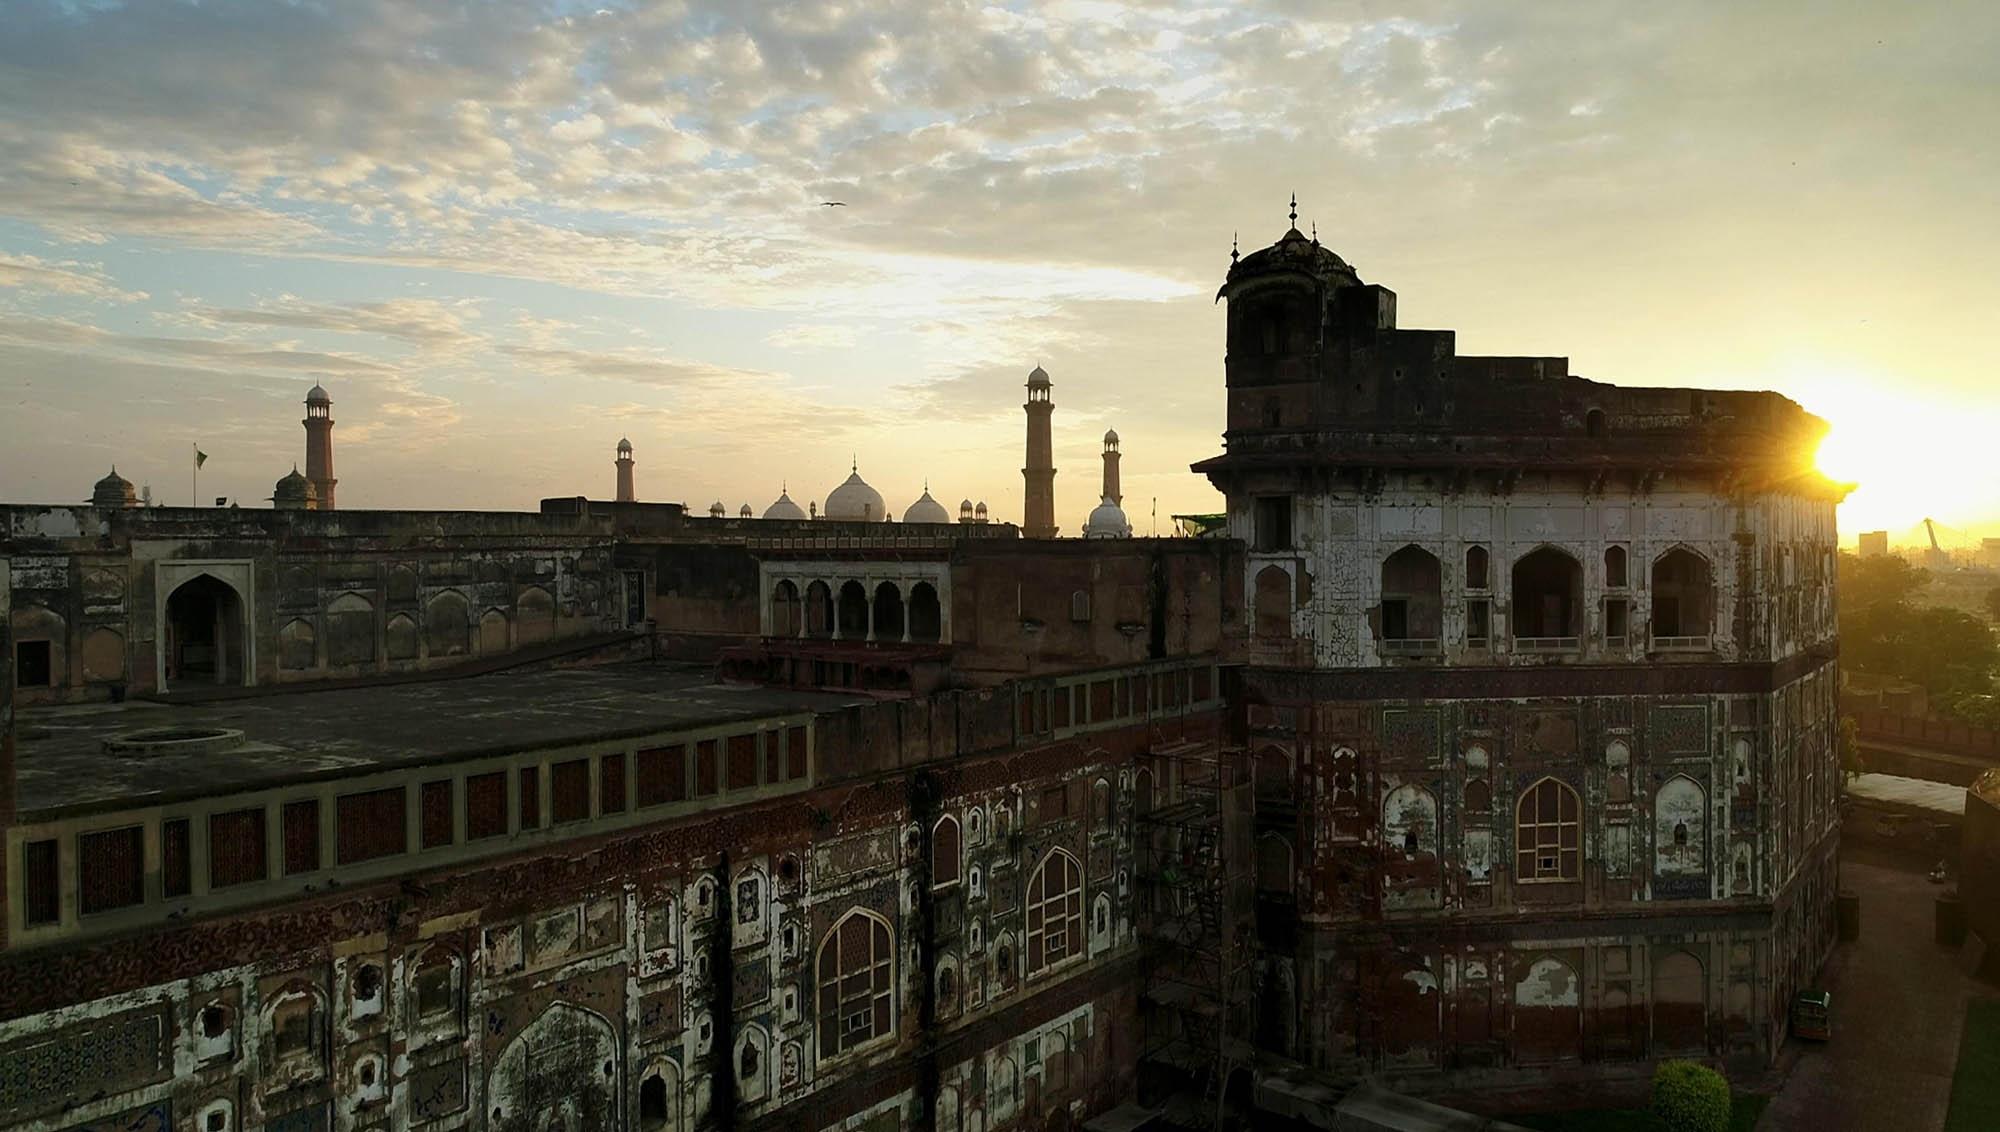 Walled City of Lahore